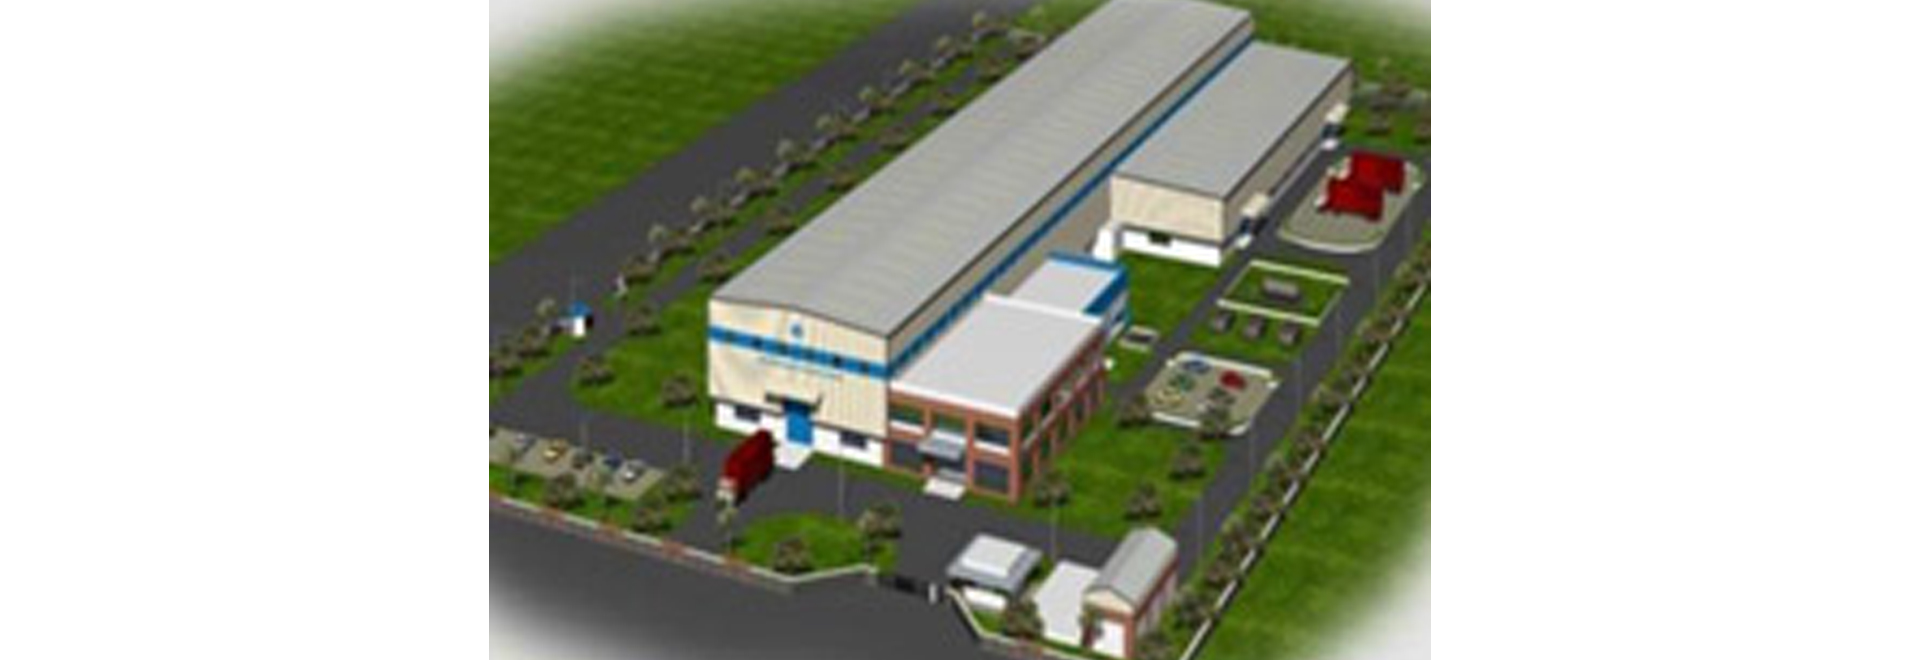 Helicopter Manufacturing Facility at Andhra Pradesh For Tata Advanced Systems Limited (TASL)